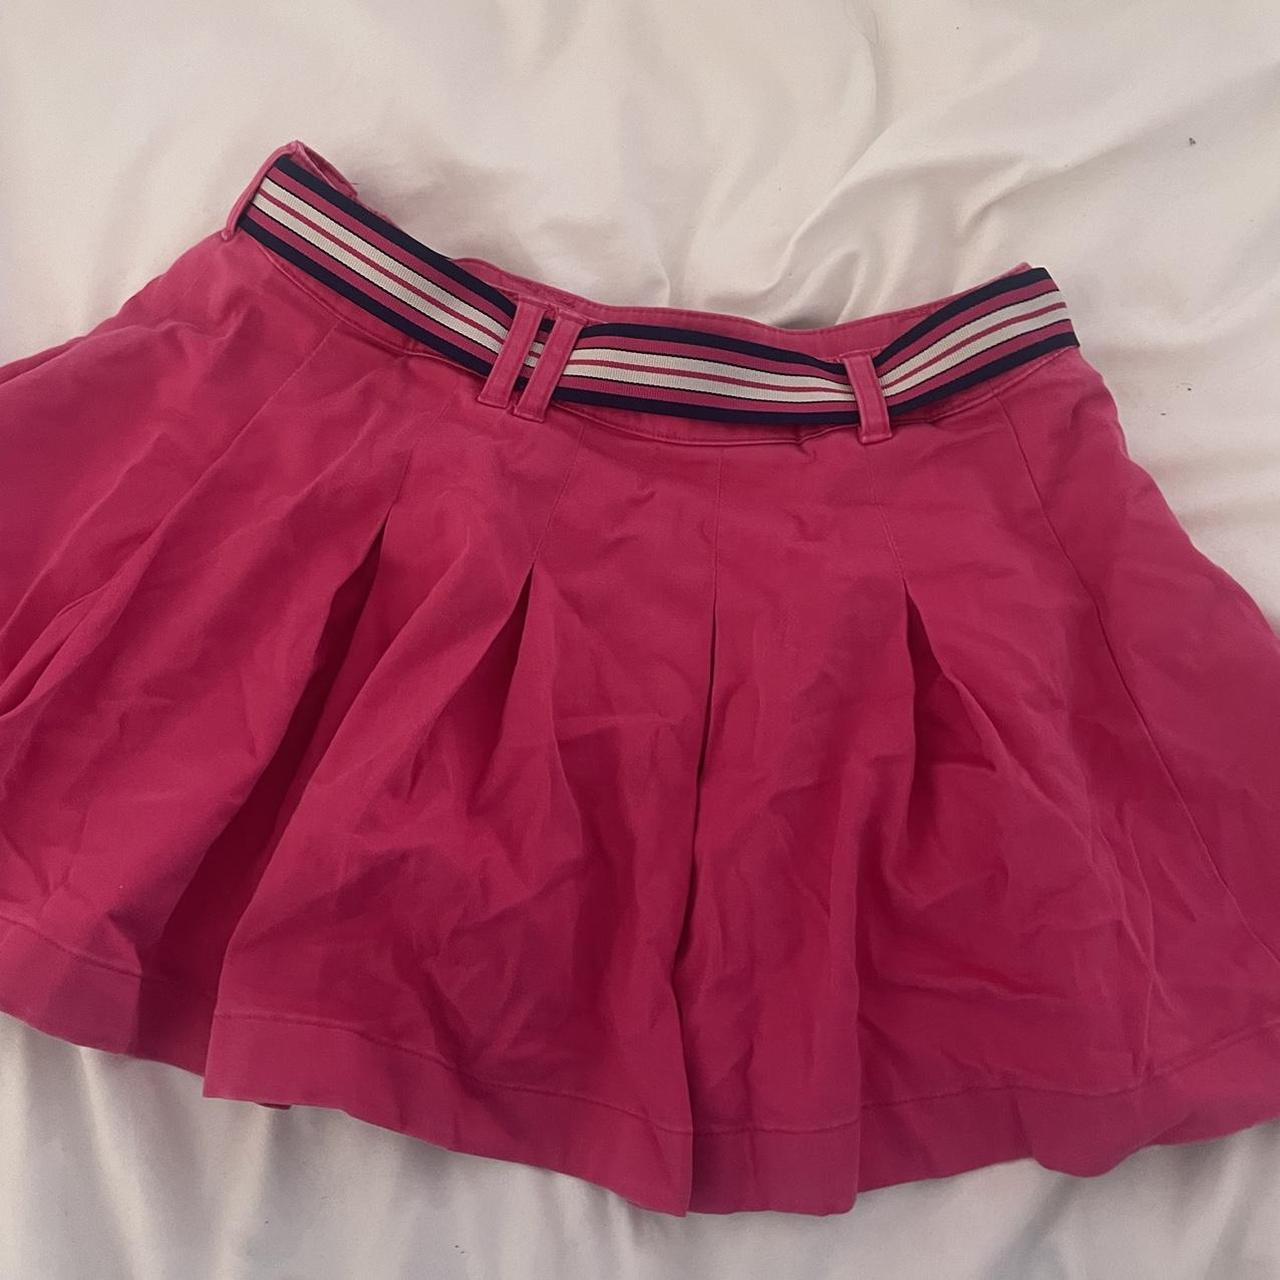 Juicy couture micro mini pleated skirt Size 10 Very... - Depop